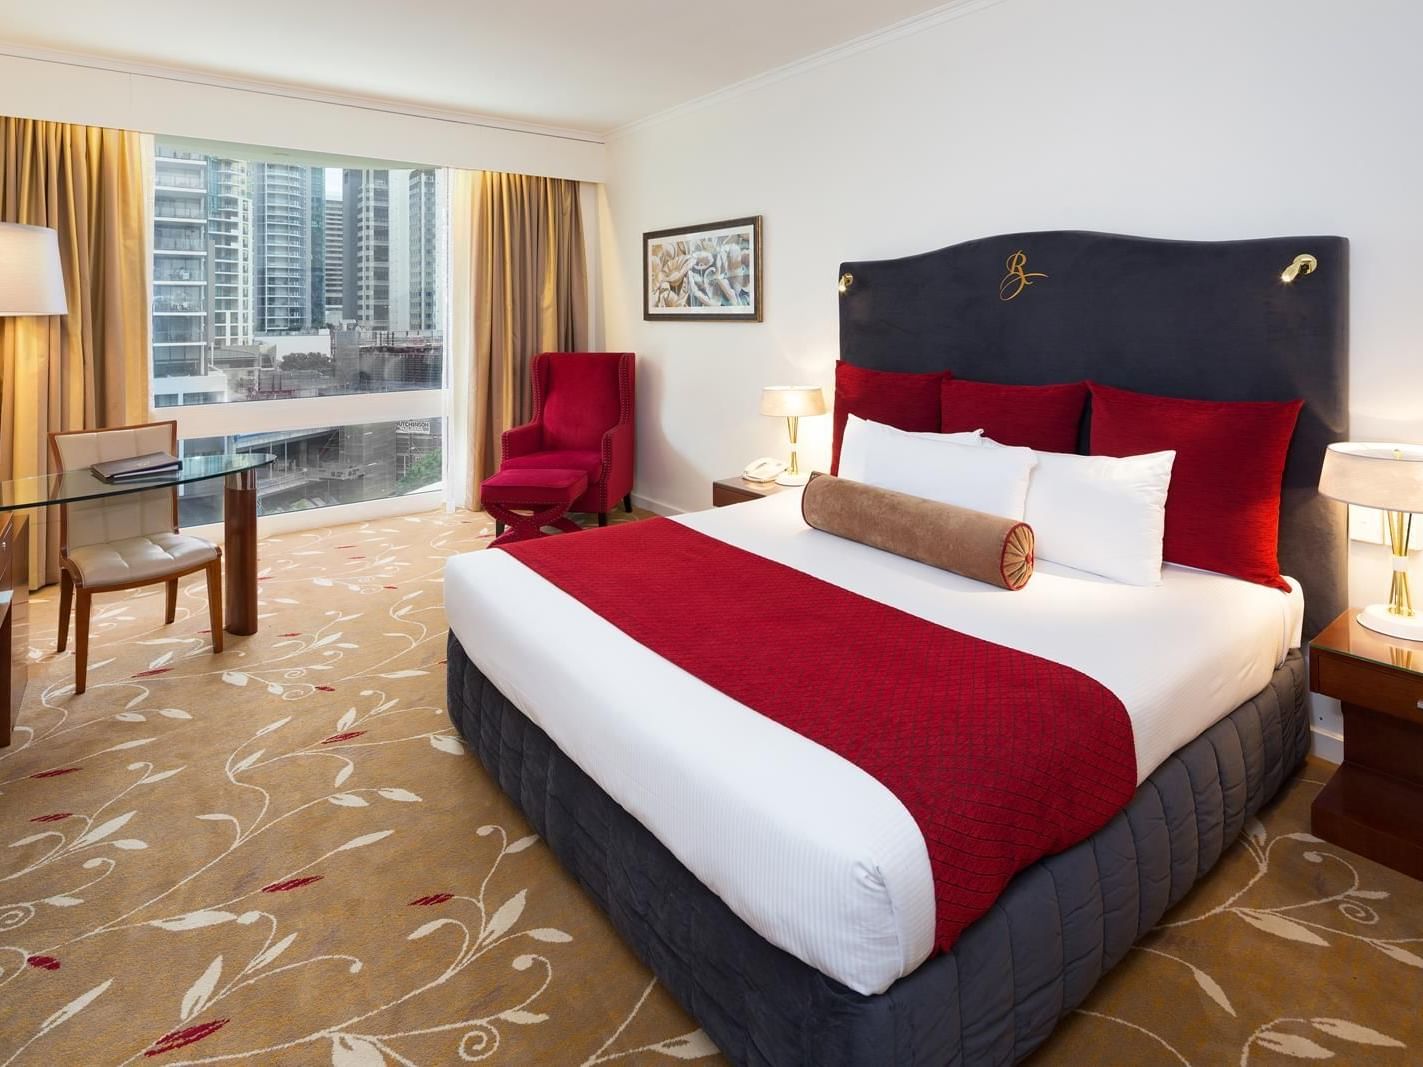 Deluxe City View King Room with one king bed at Royal on the Park hotel